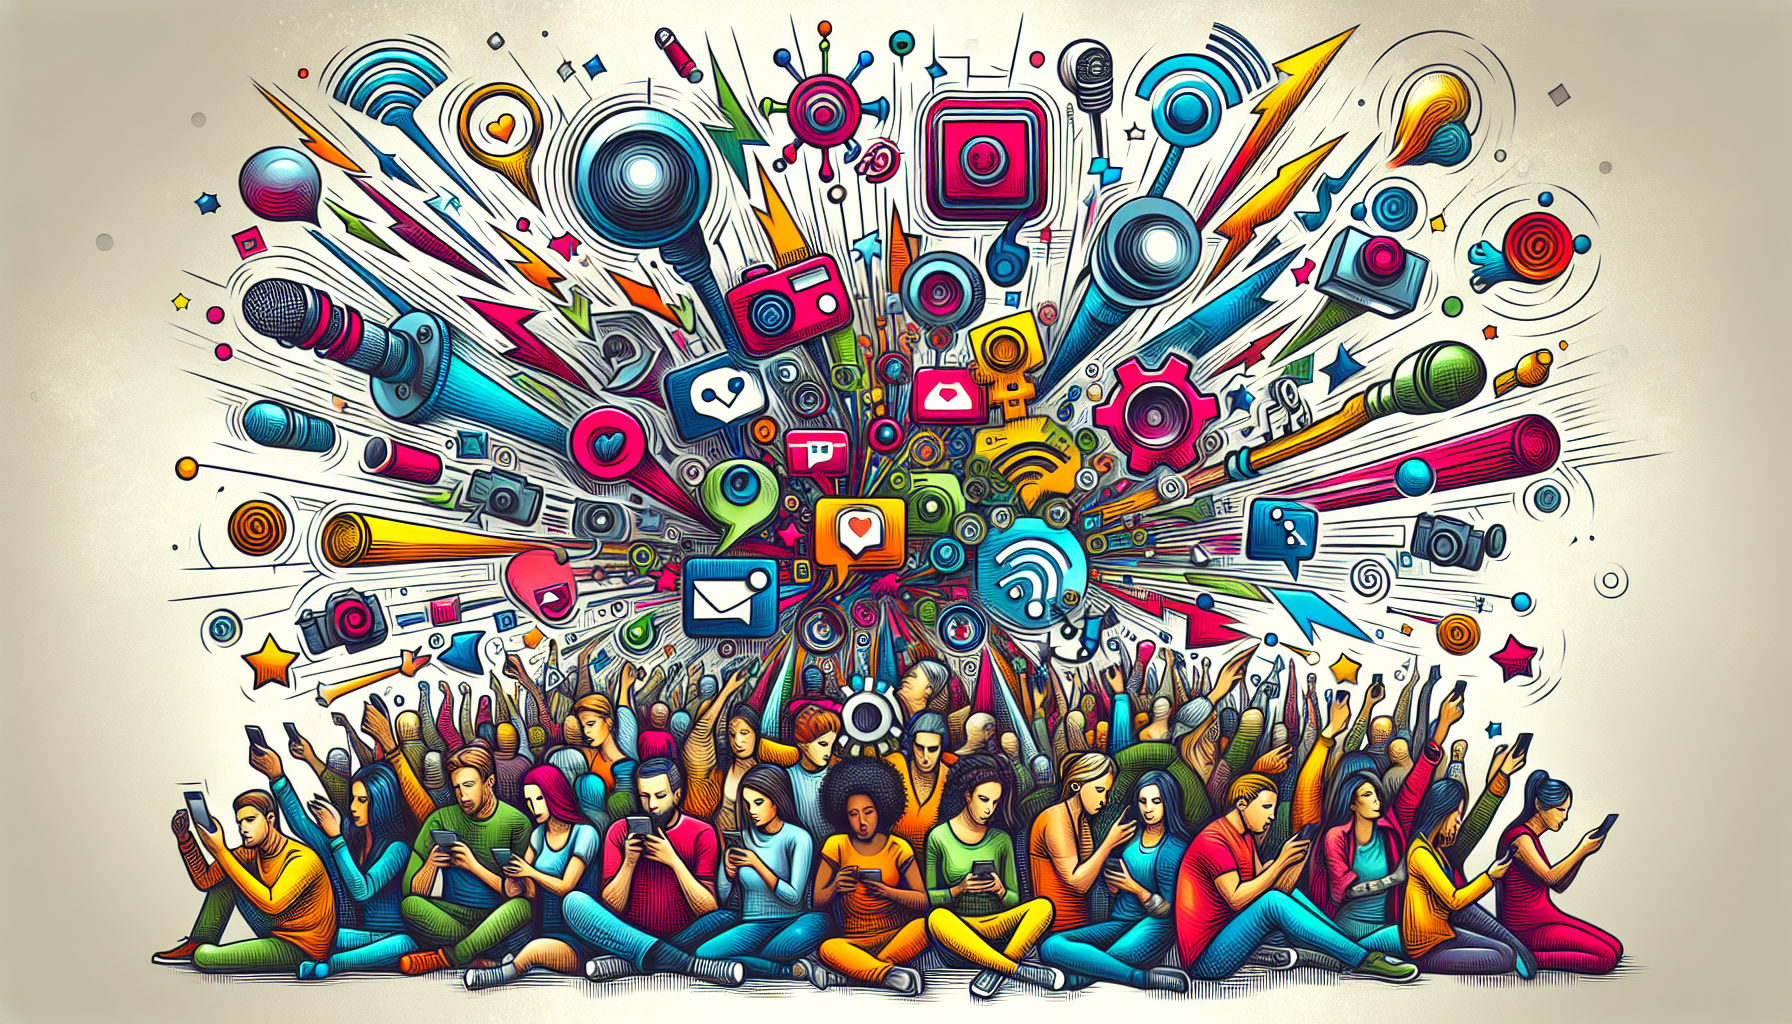 Illustration of a group of diverse people engaging with social media influencers